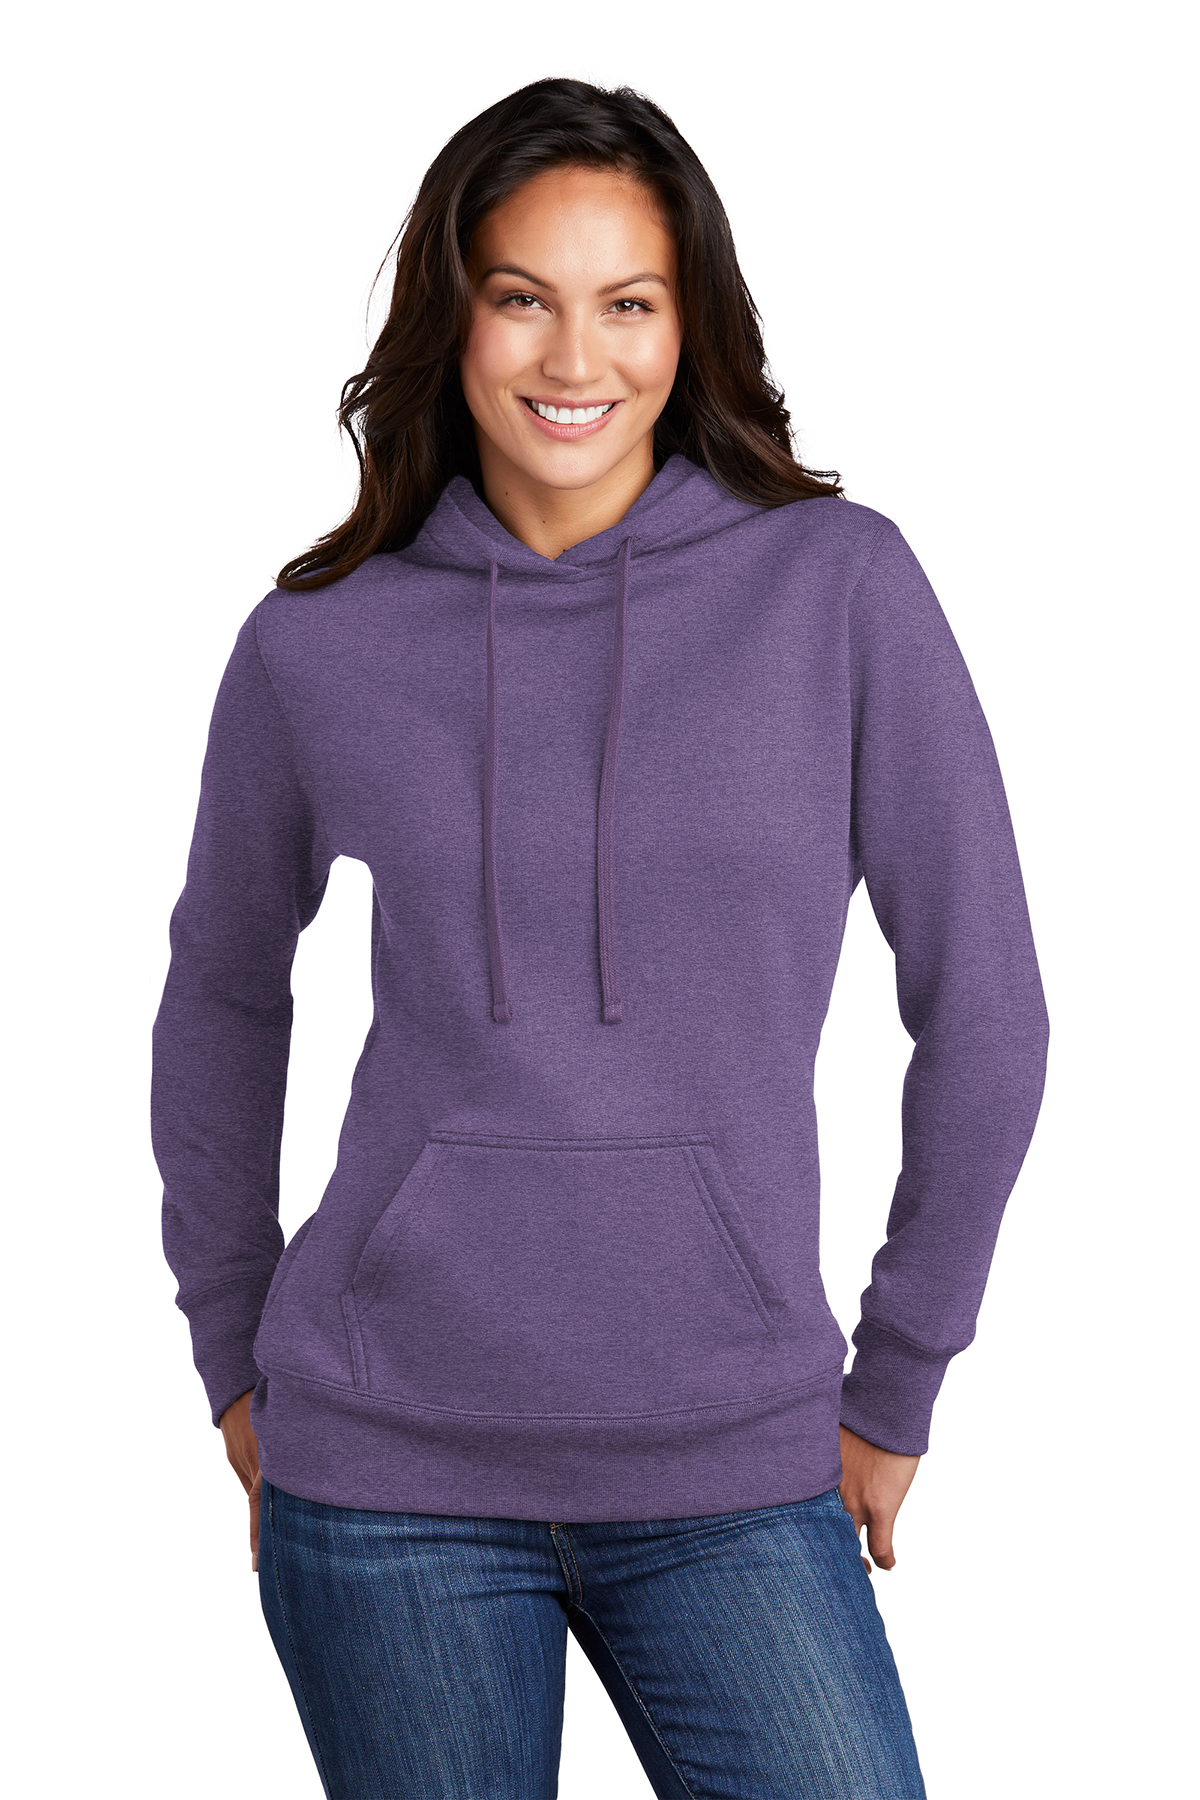 Ladies Comfort Colors Hooded Sweatshirts, Embroidered With Your Logo!